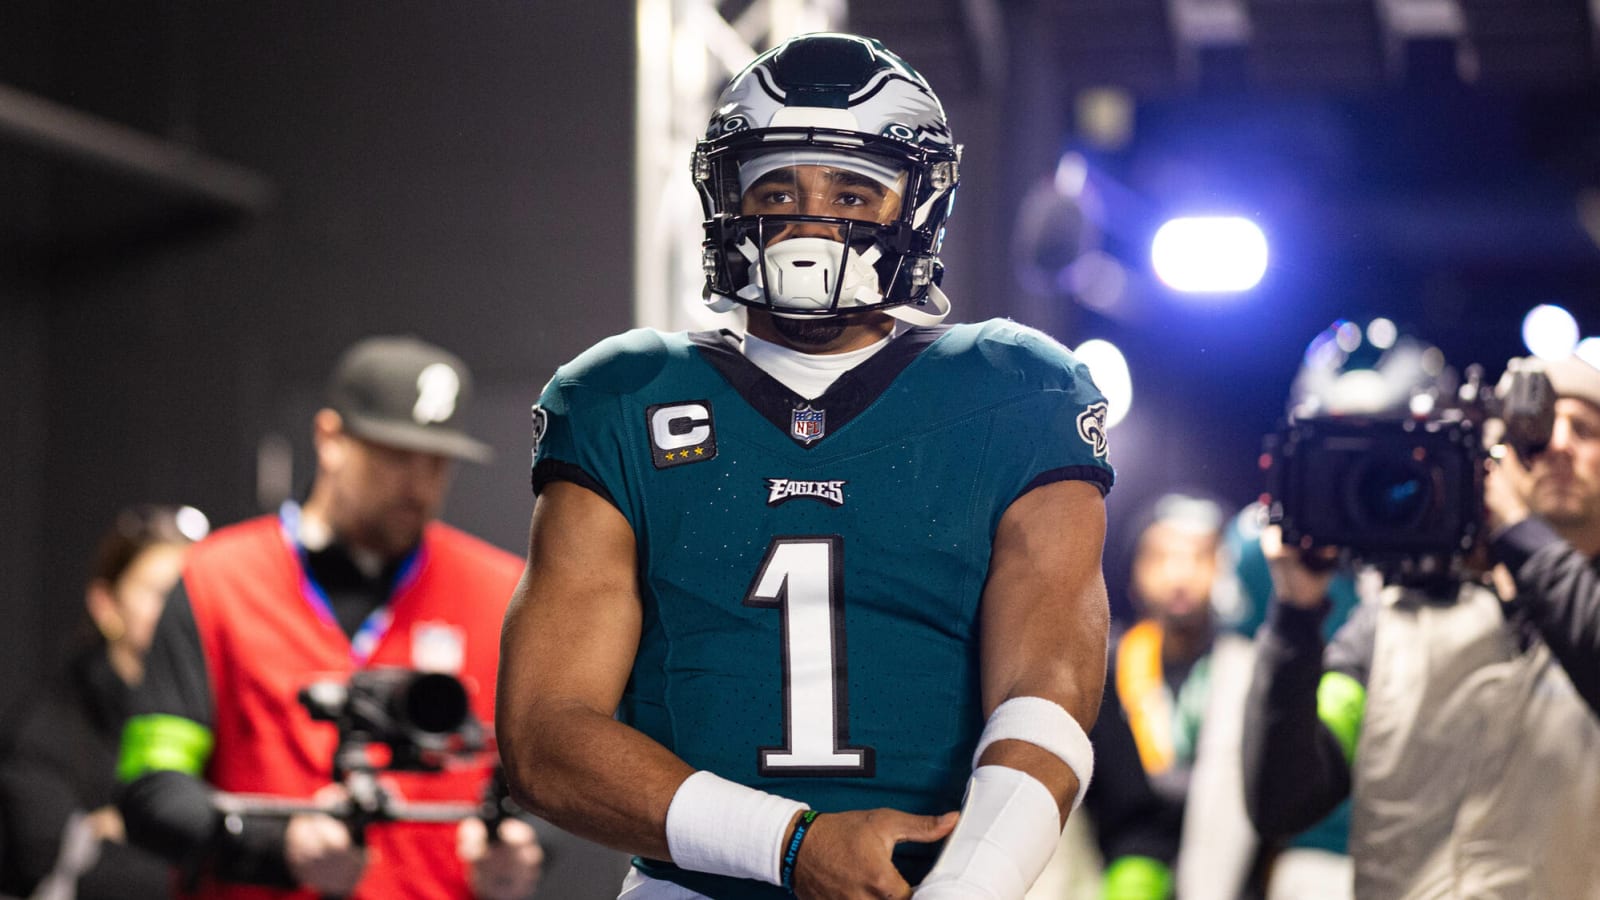 All signs point to early playoff exit for Eagles | Yardbarker